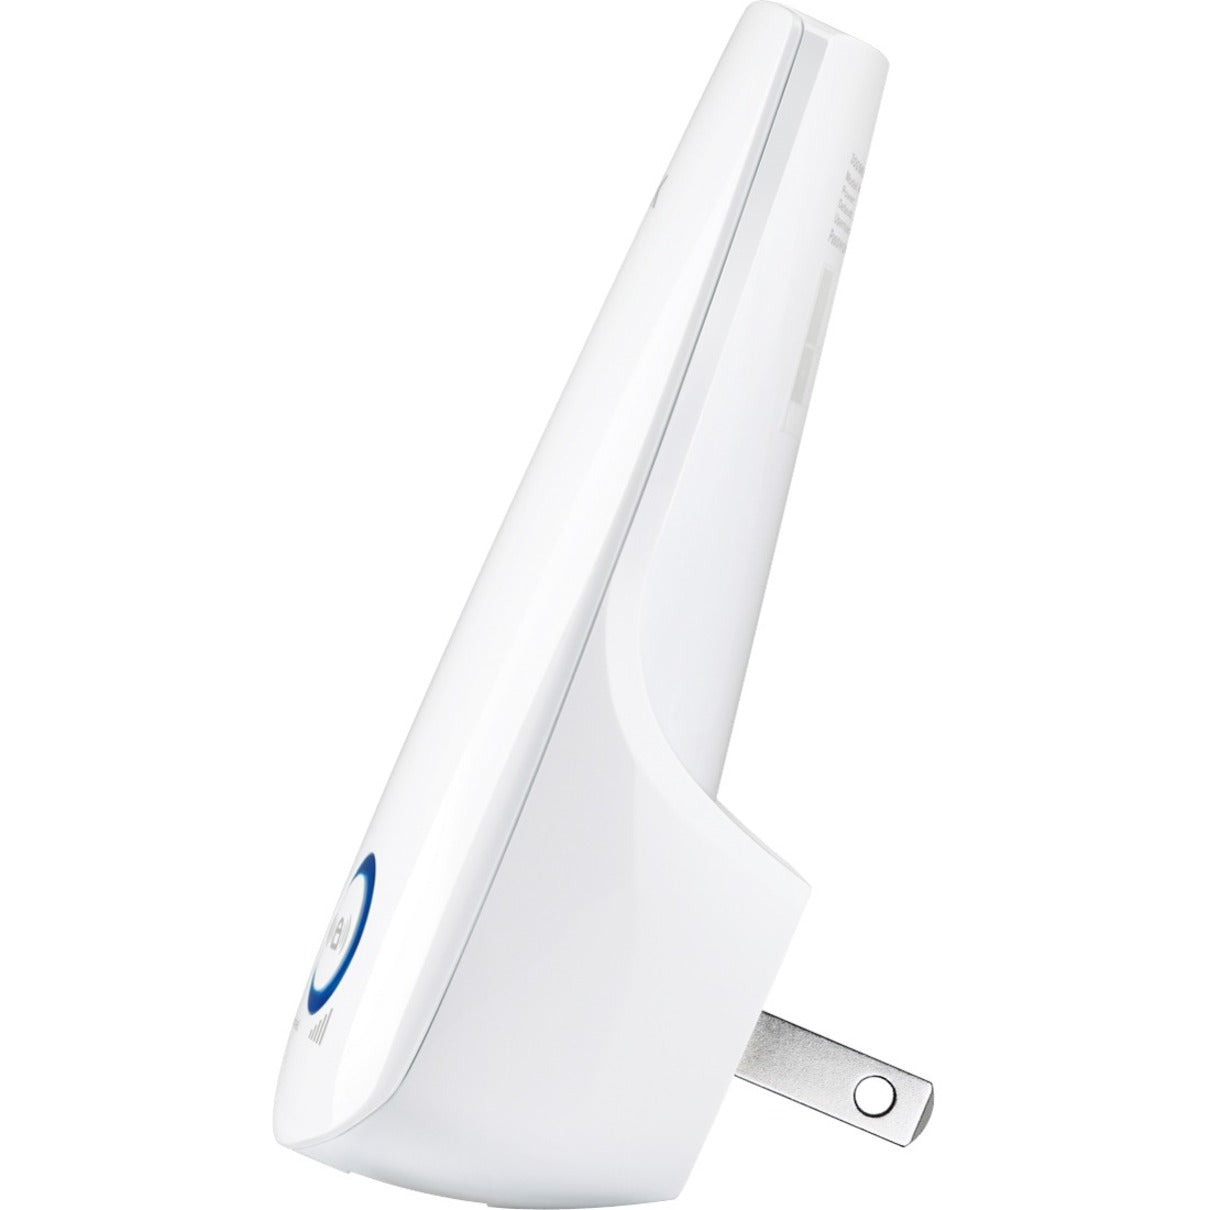 TP-Link Universal Wireless N Range Extender - Extend Your Wi-Fi Coverage [Discontinued]